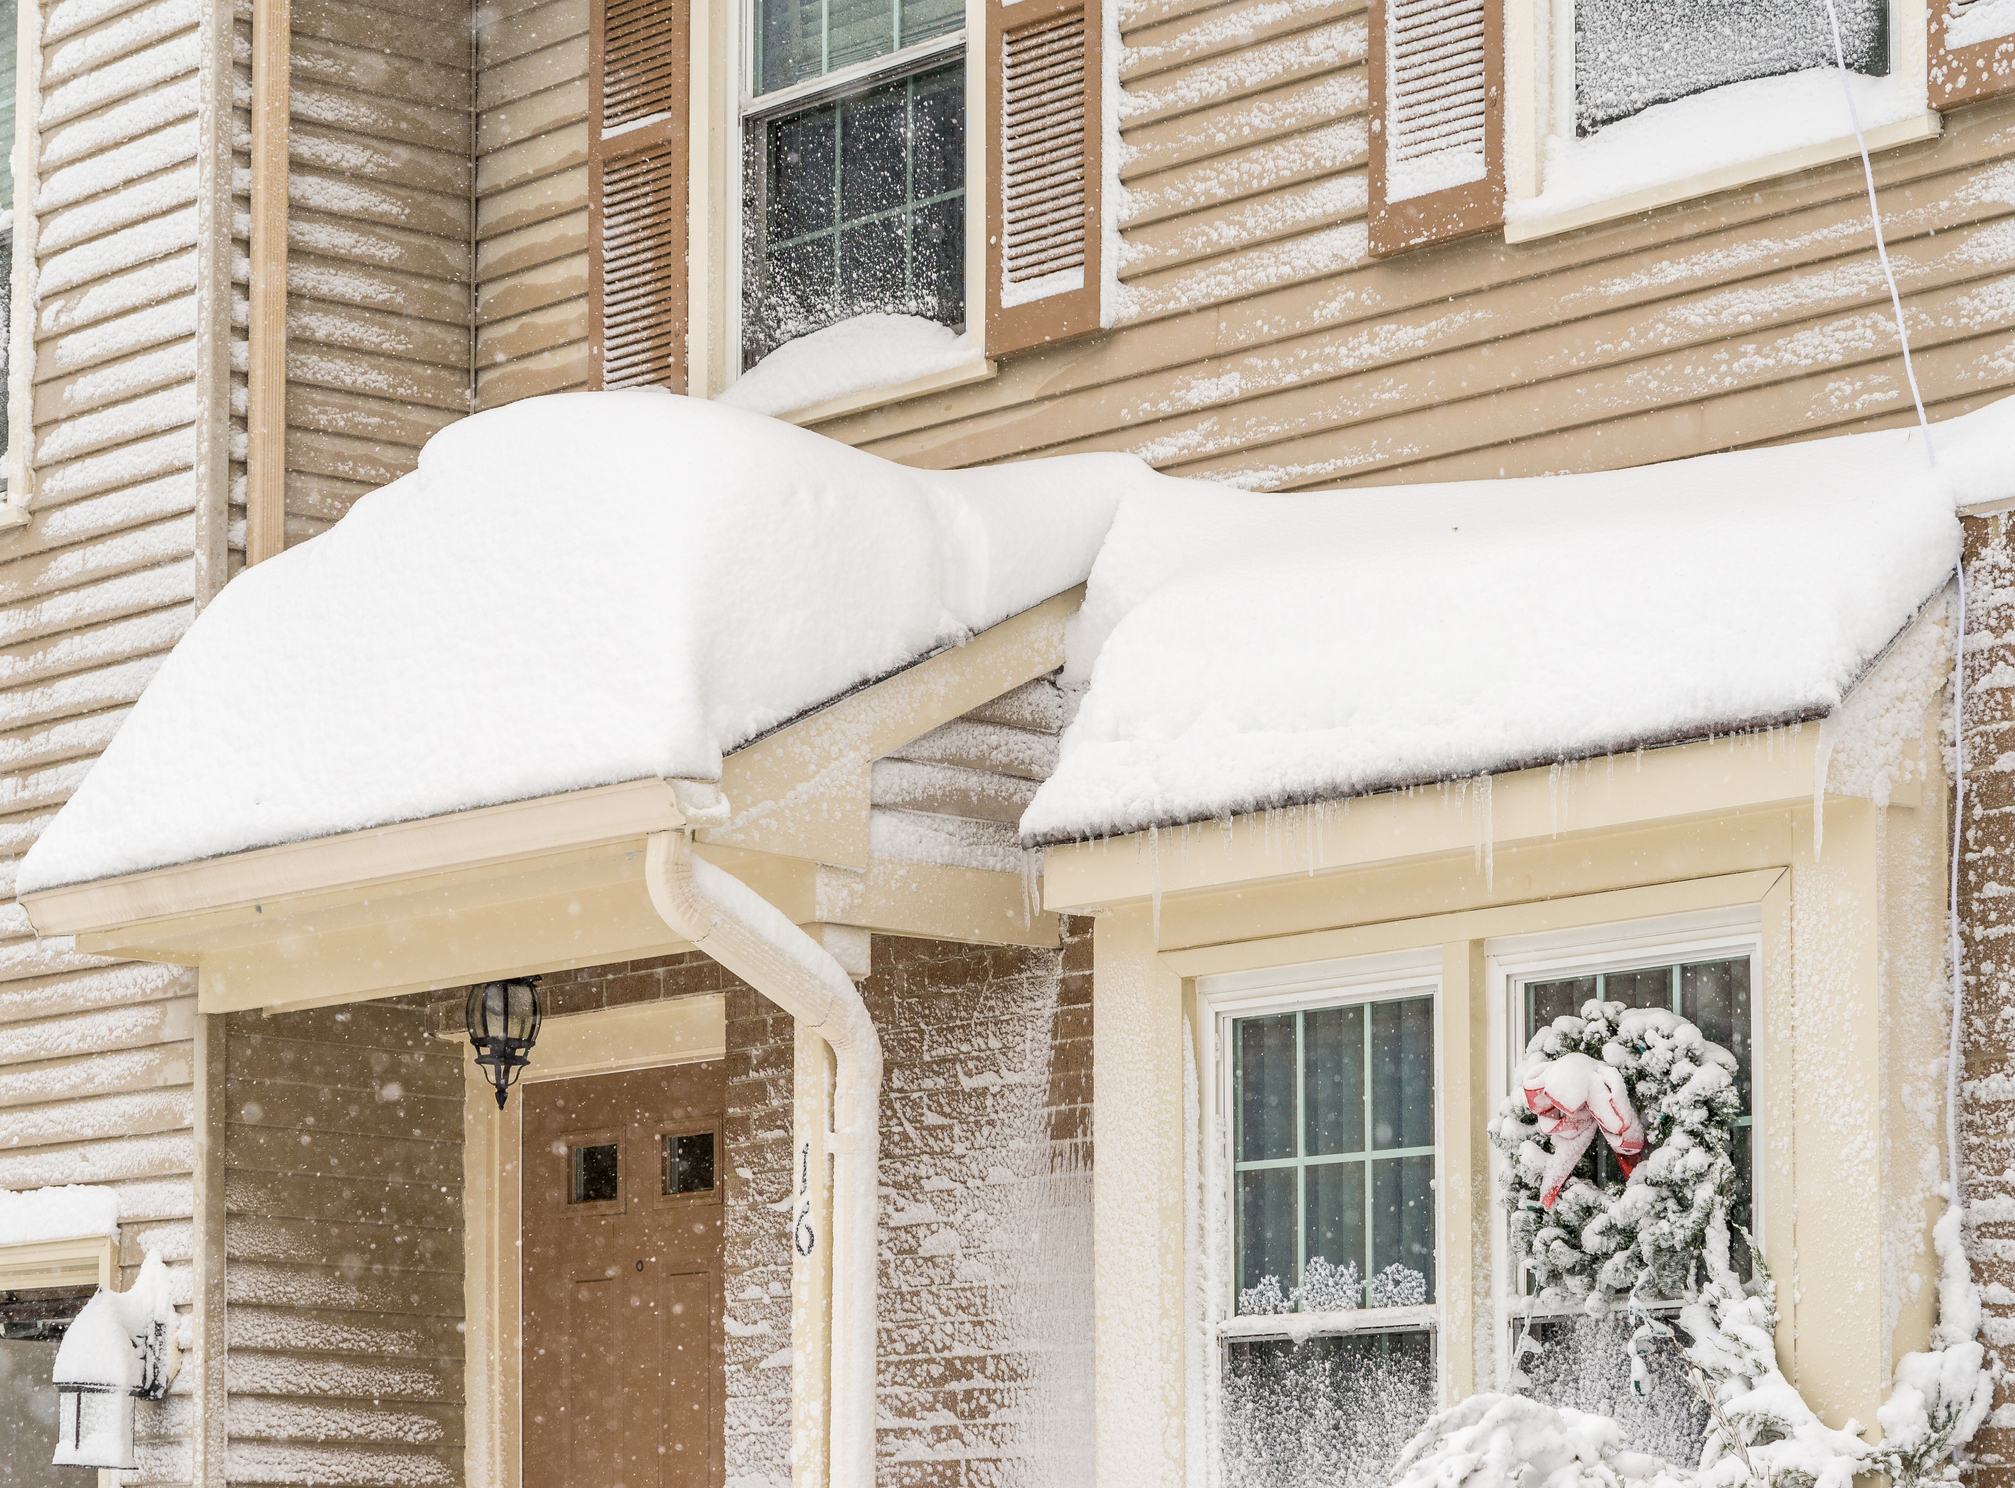 Does homeowners insurance cover snow damage?